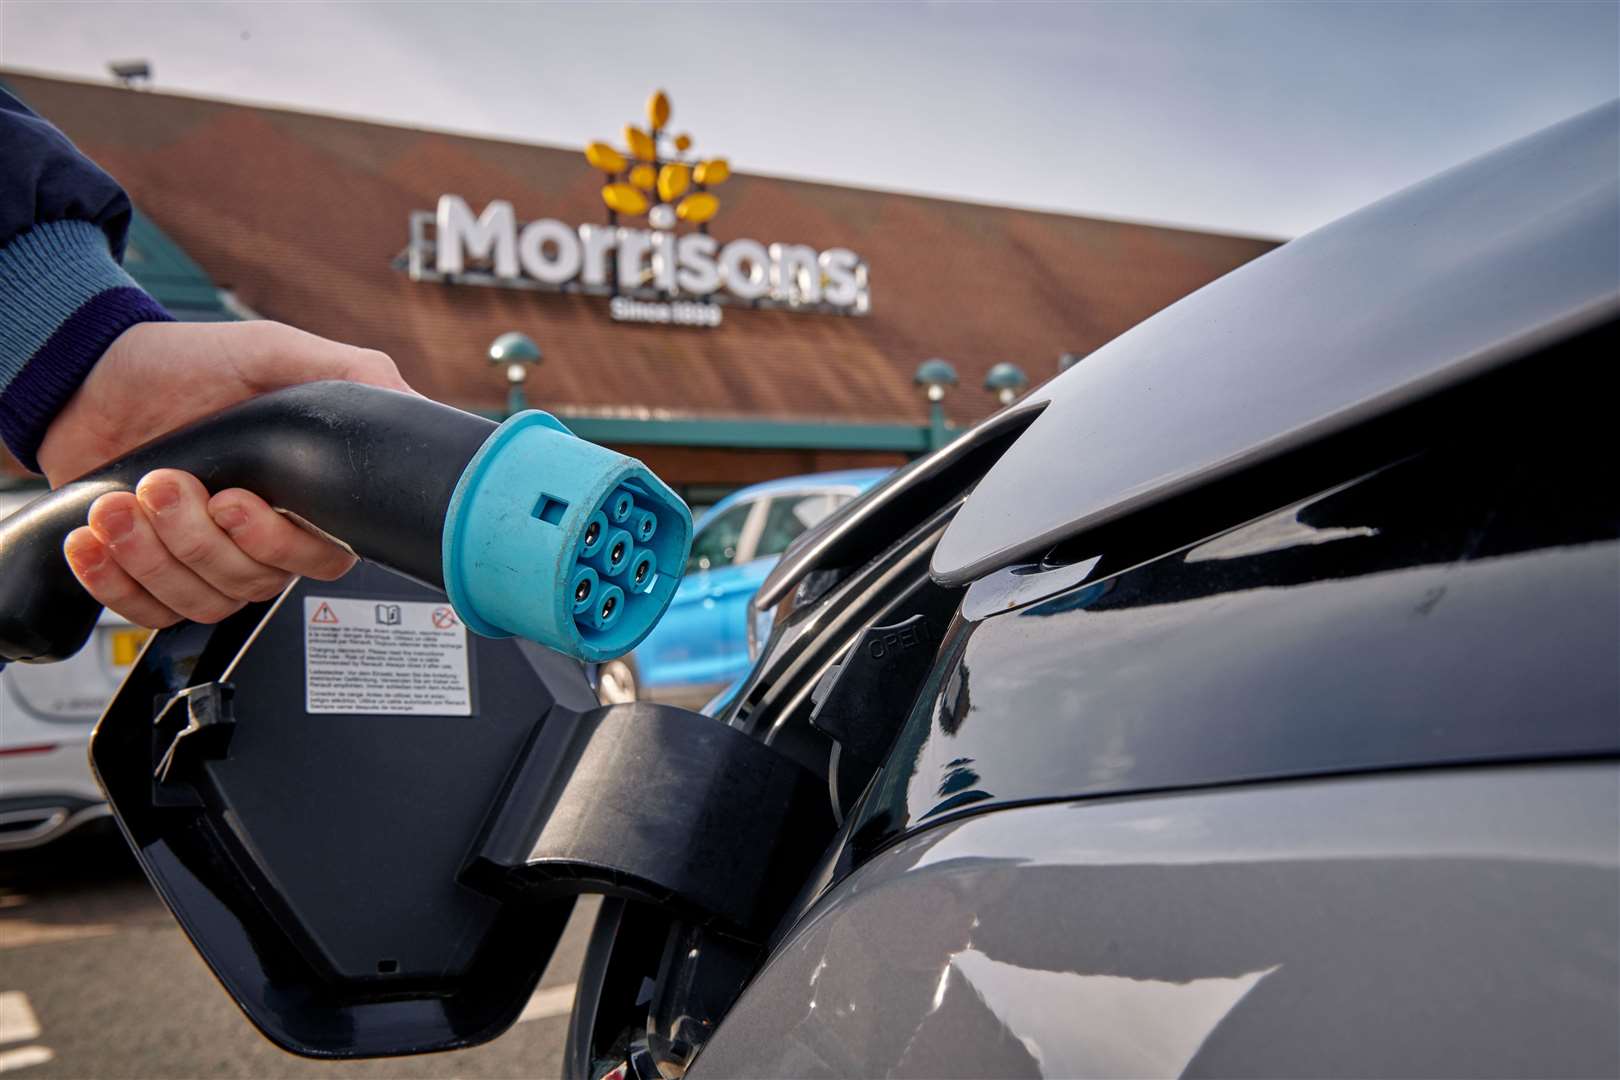 Over the next twelve months Morrisons will add an additional 100 rapid chargers to its existing network